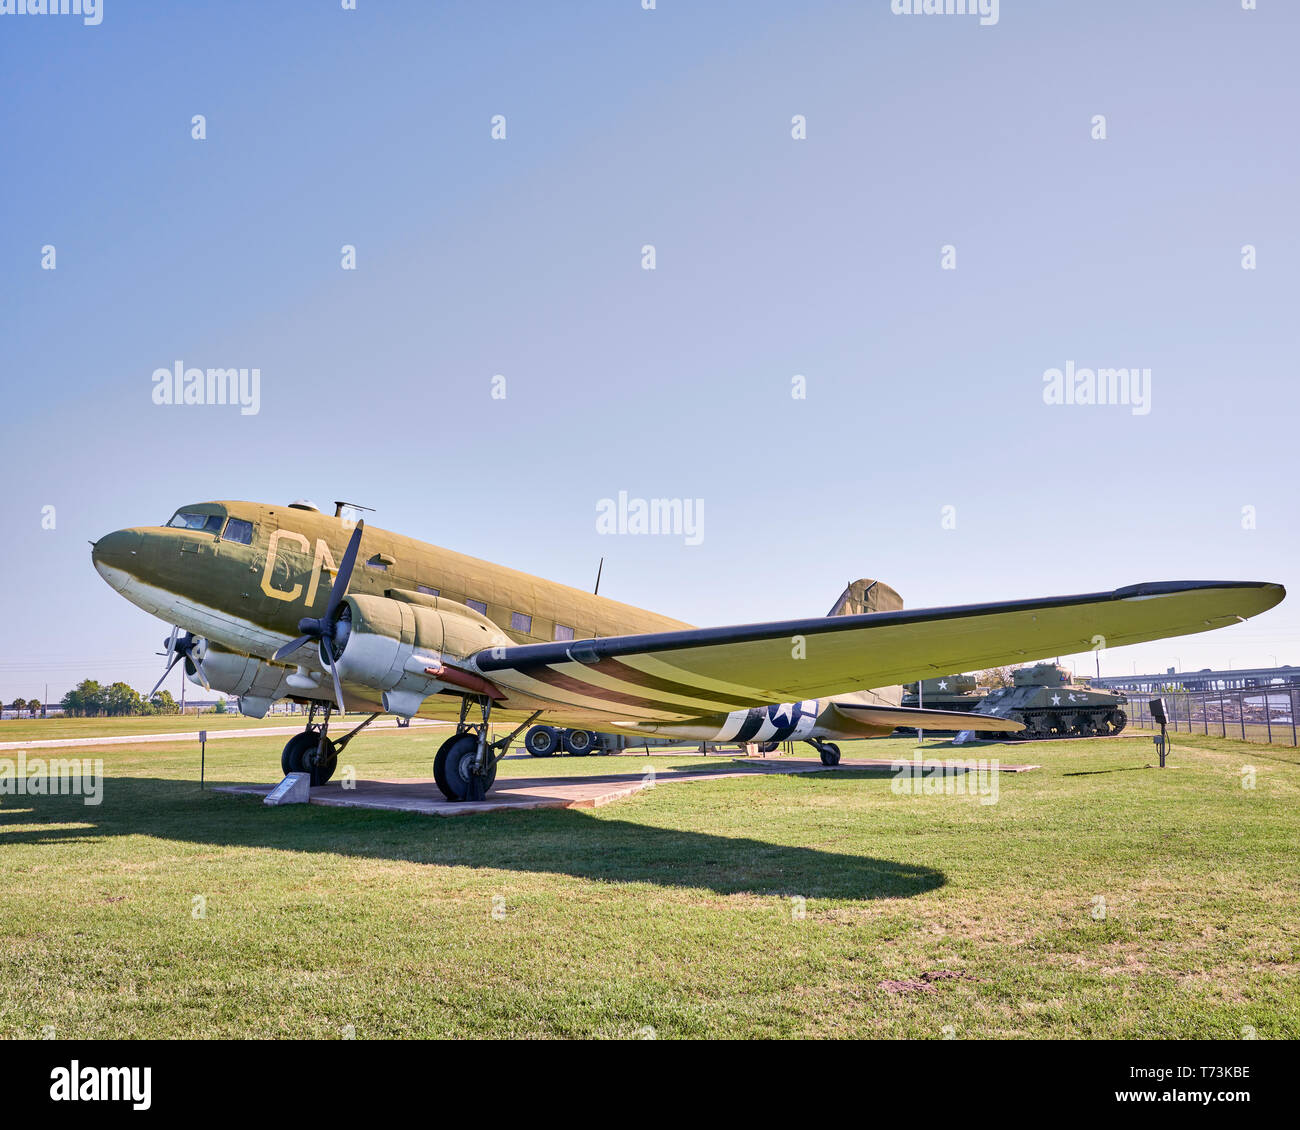 WWII US Army Air Corps Douglas C-47 Dakota, or Skytrain, transport plane on static display at an outdoor museum in Mobile Alabama, USA. Stock Photo